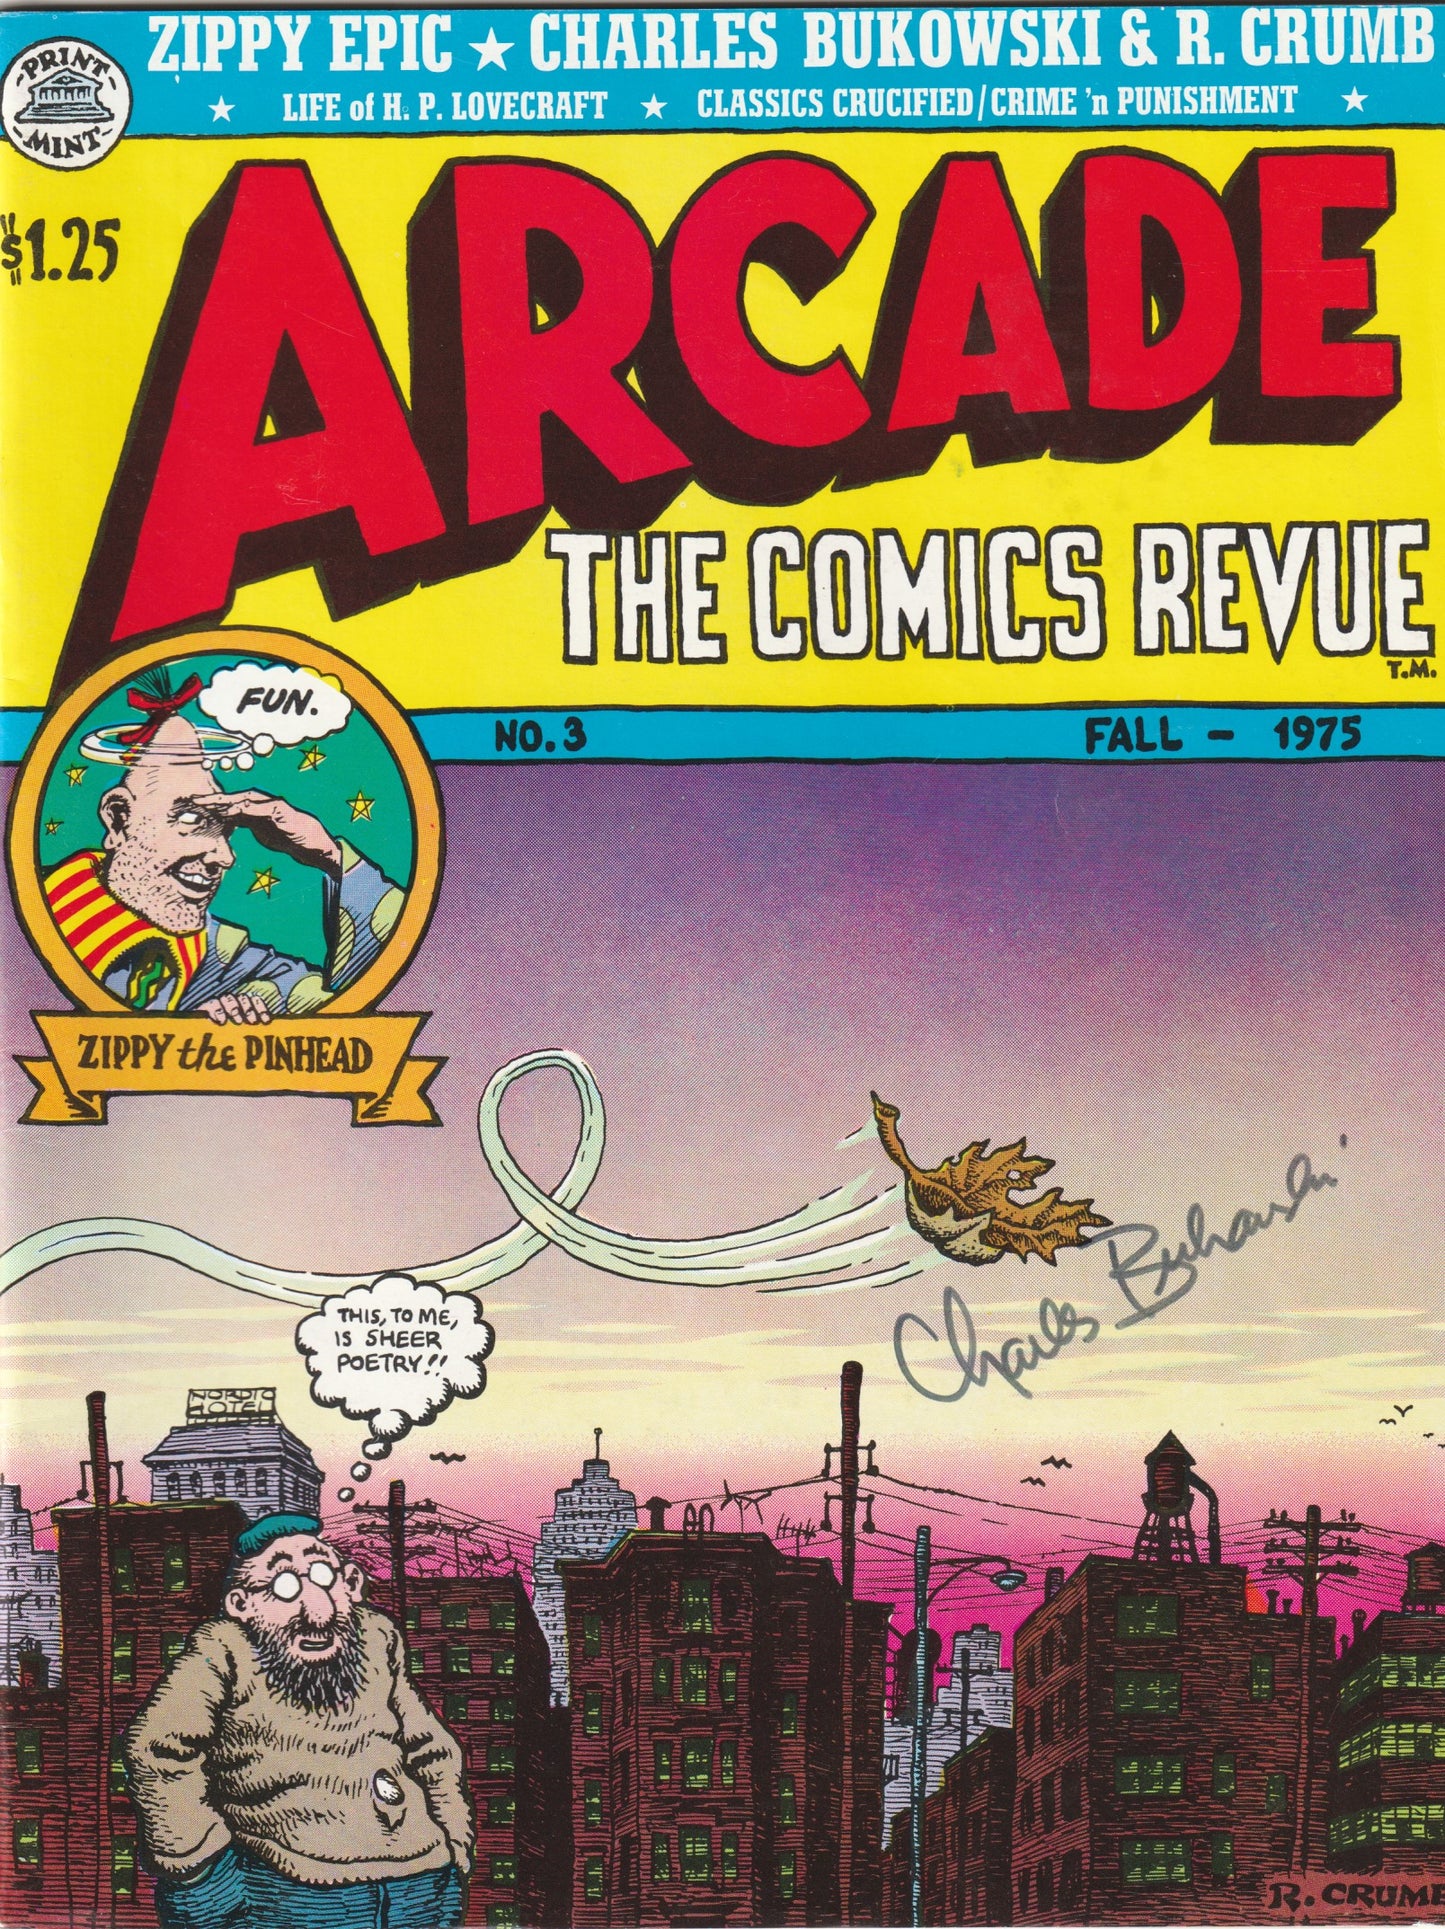 Signed Issue of Arcade 3 with a Bukowski Short-Story Illustrated by R. Crumb, Photocopies of Pre-Production Layouts with a Signed Note From Bill Griffith to John Martin, Promotional Flyer From Arcade for upcoming Bukowski/Crumb Issue.